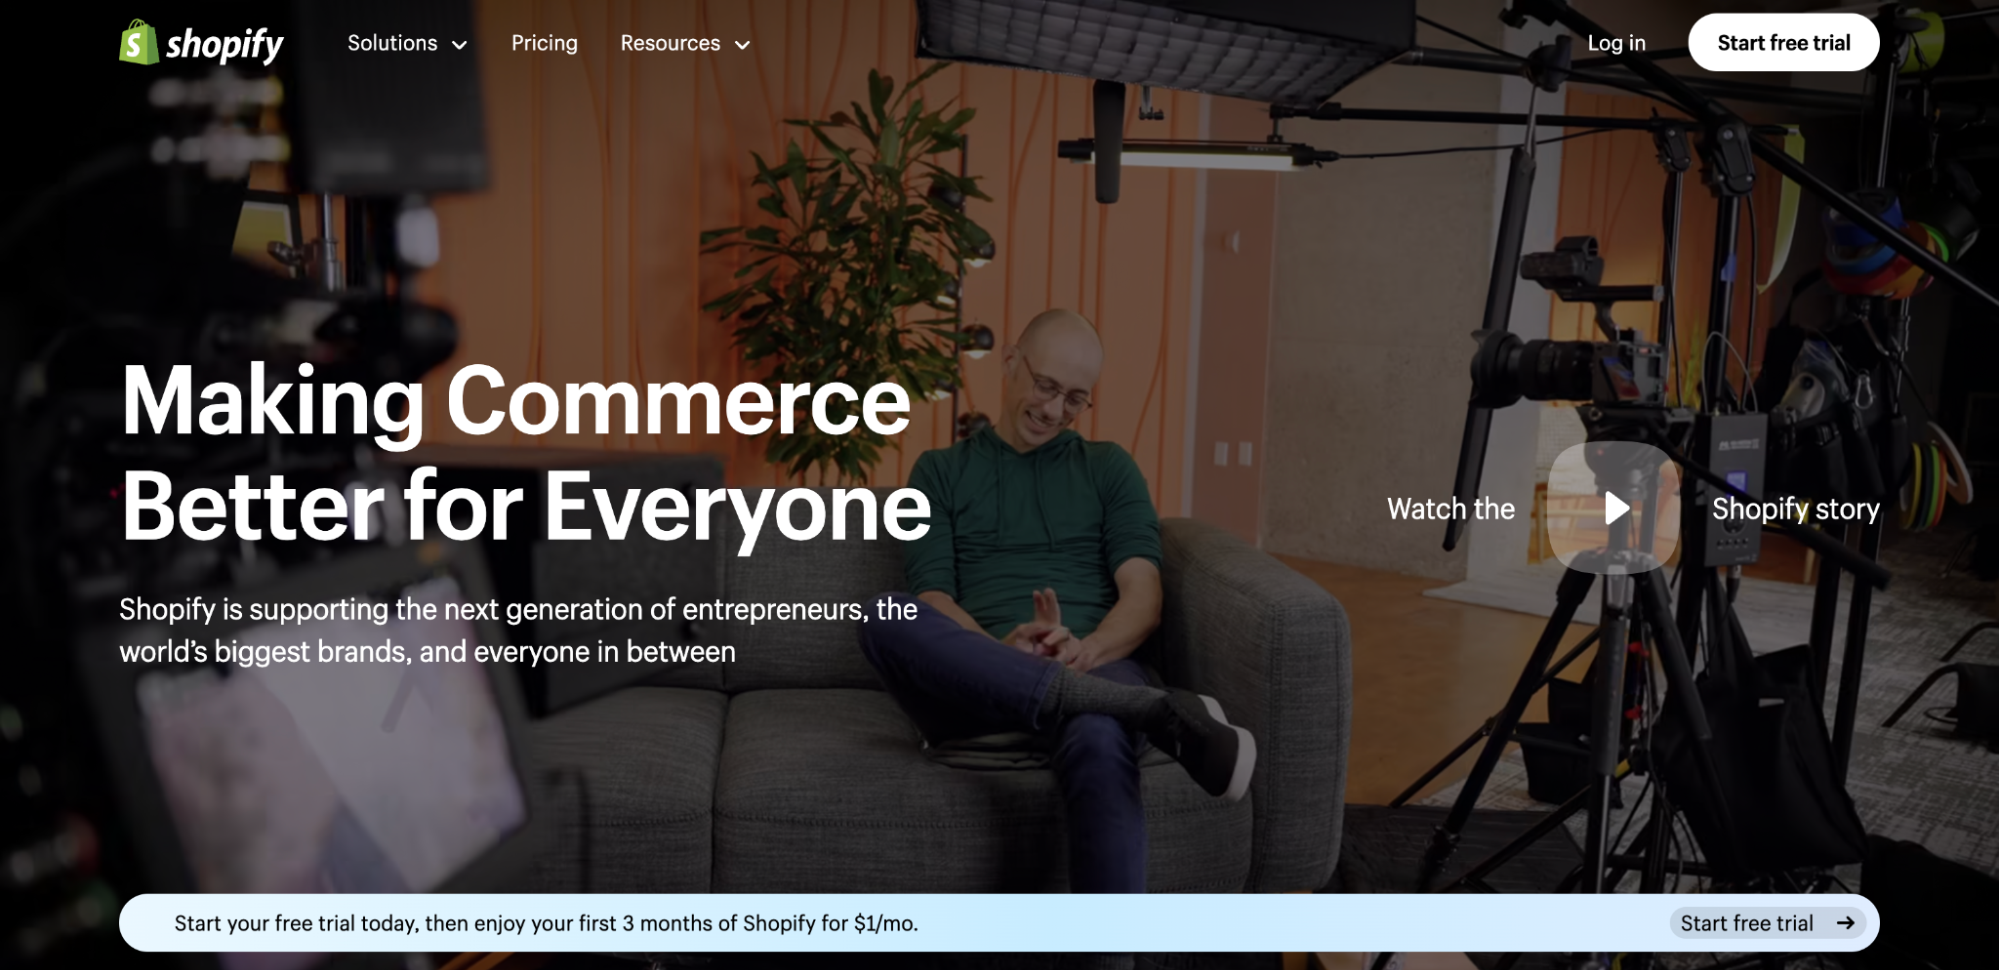 Shopify logo and navigation bar above a video of Shopify founder Tobi Lütke sitting on a gray couch.